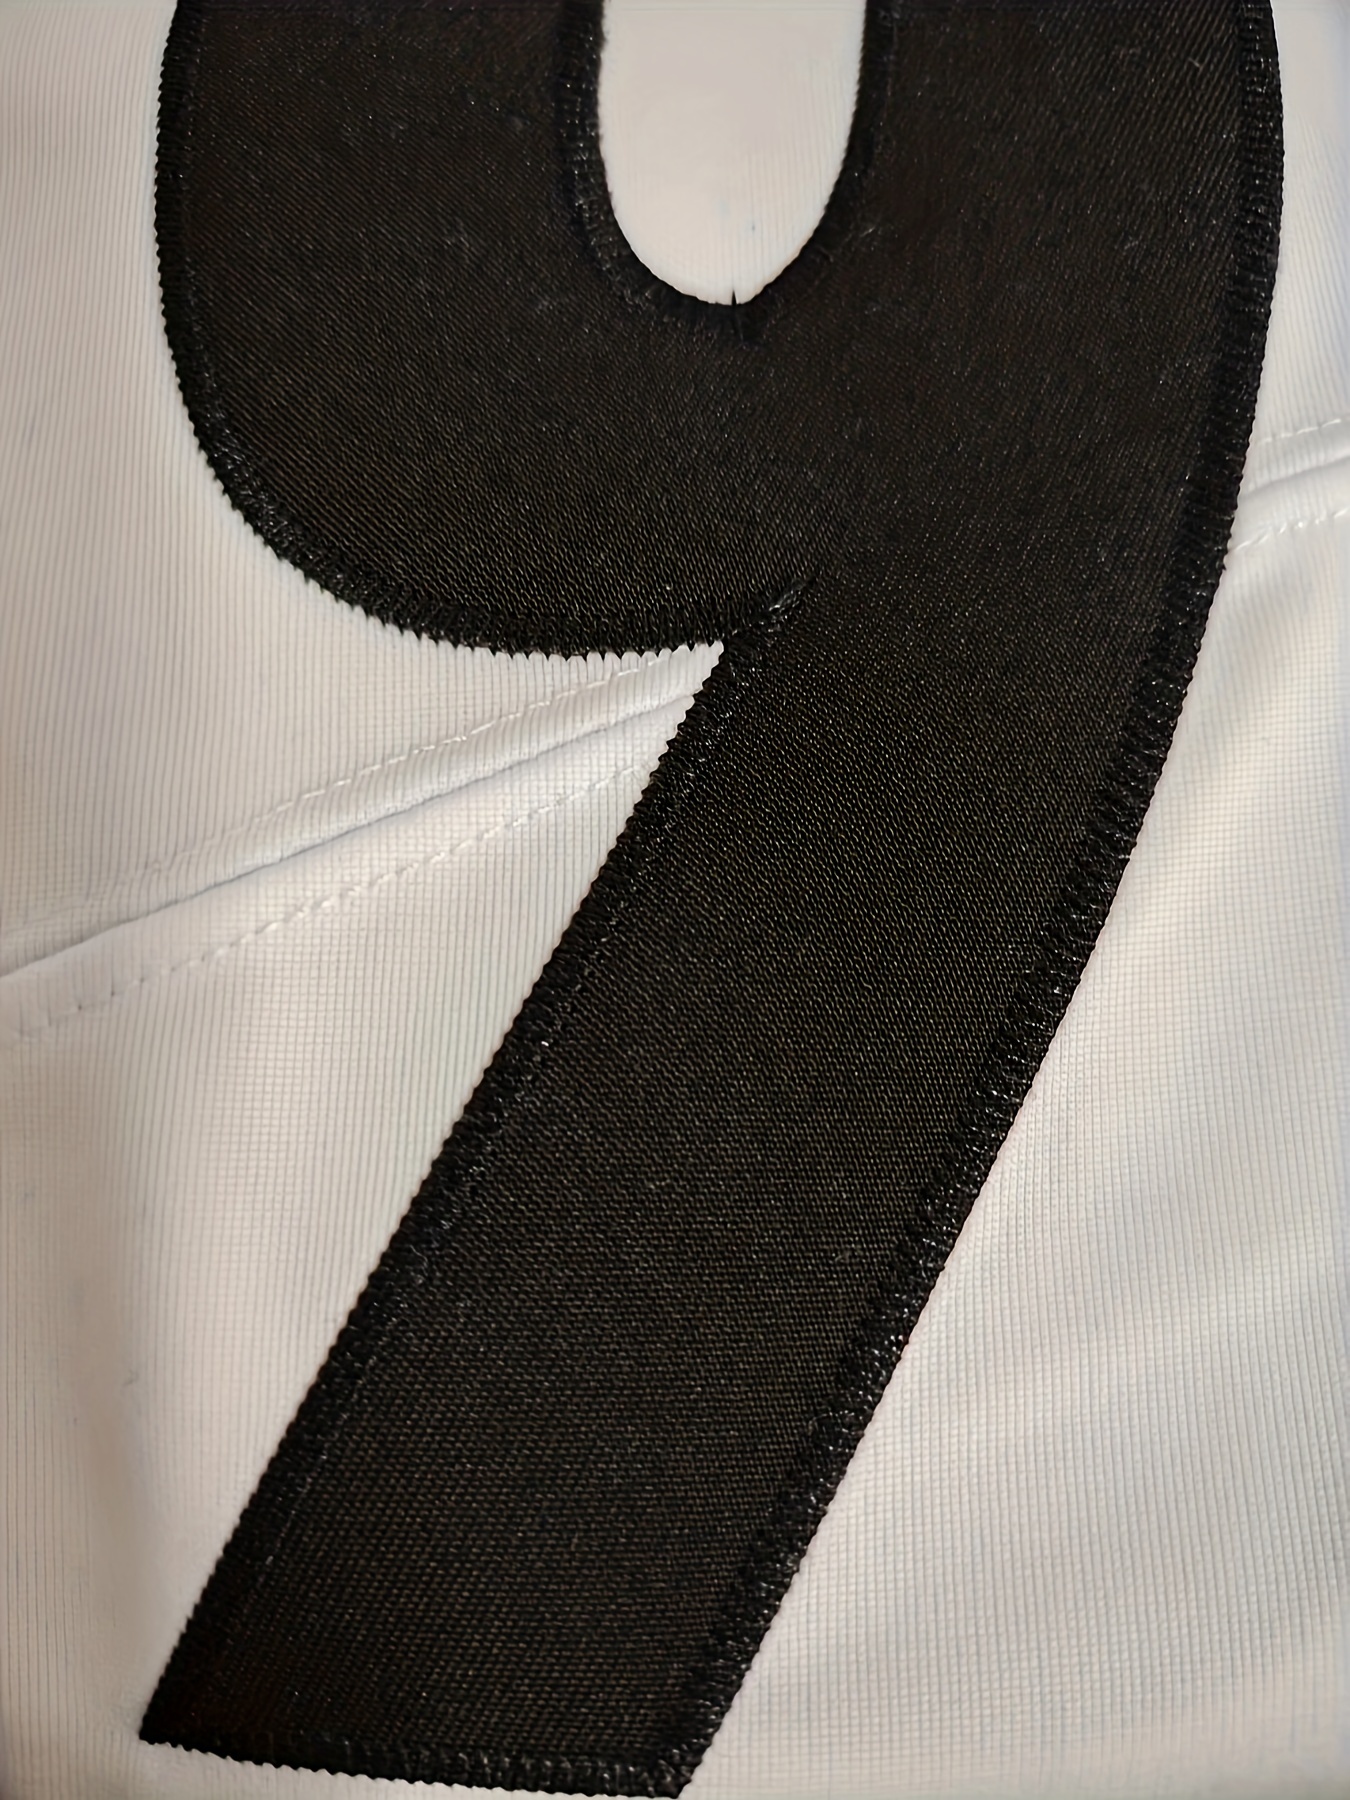 White Football Shirt Number 7 Template